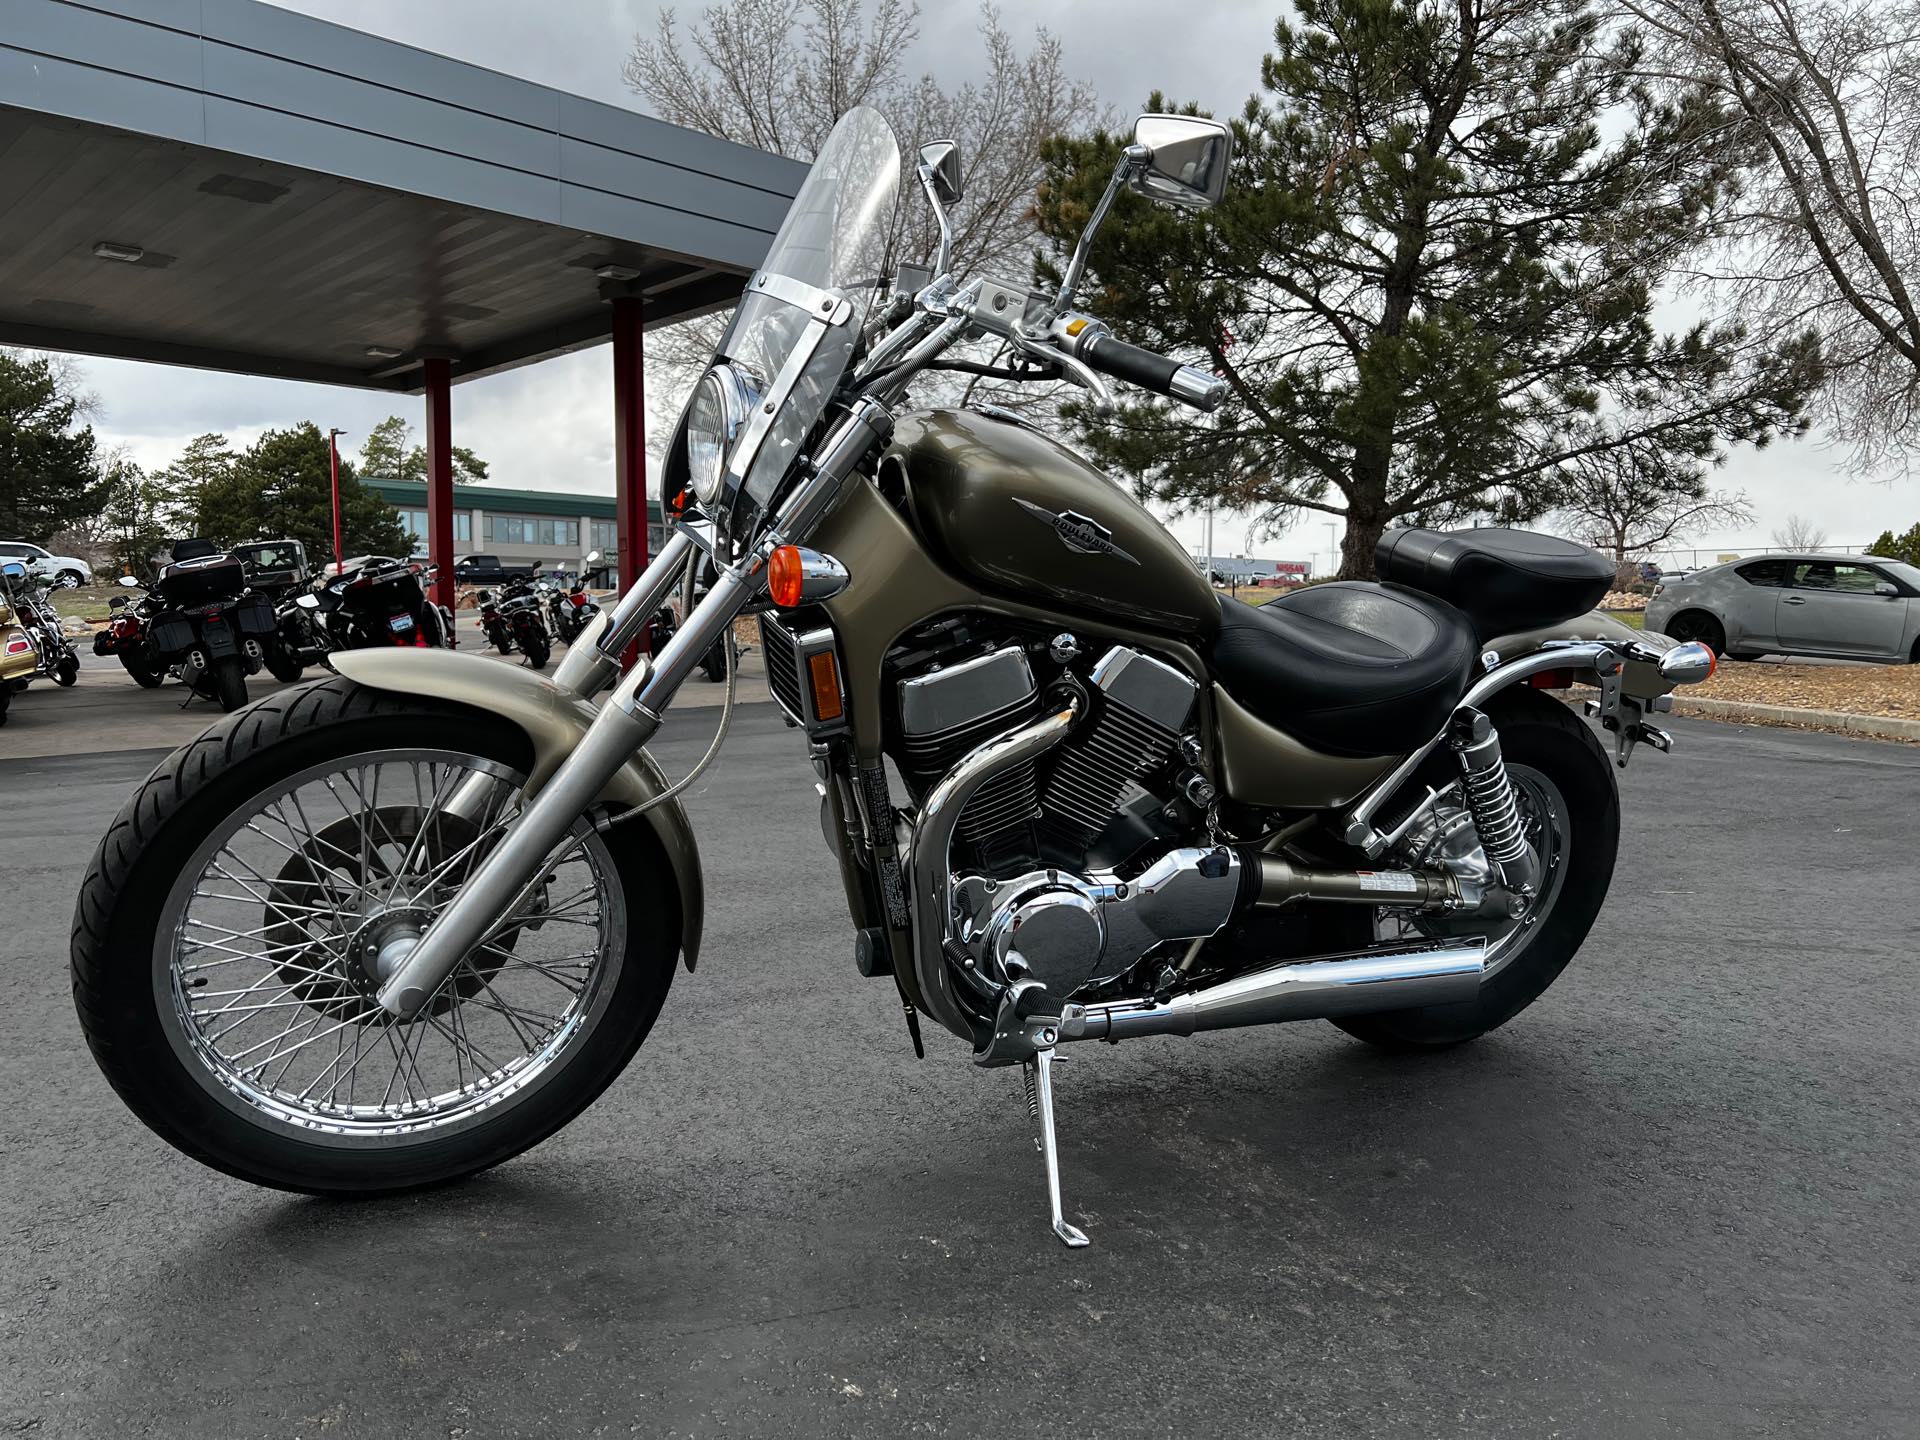 2008 Suzuki Boulevard S83 at Aces Motorcycles - Fort Collins